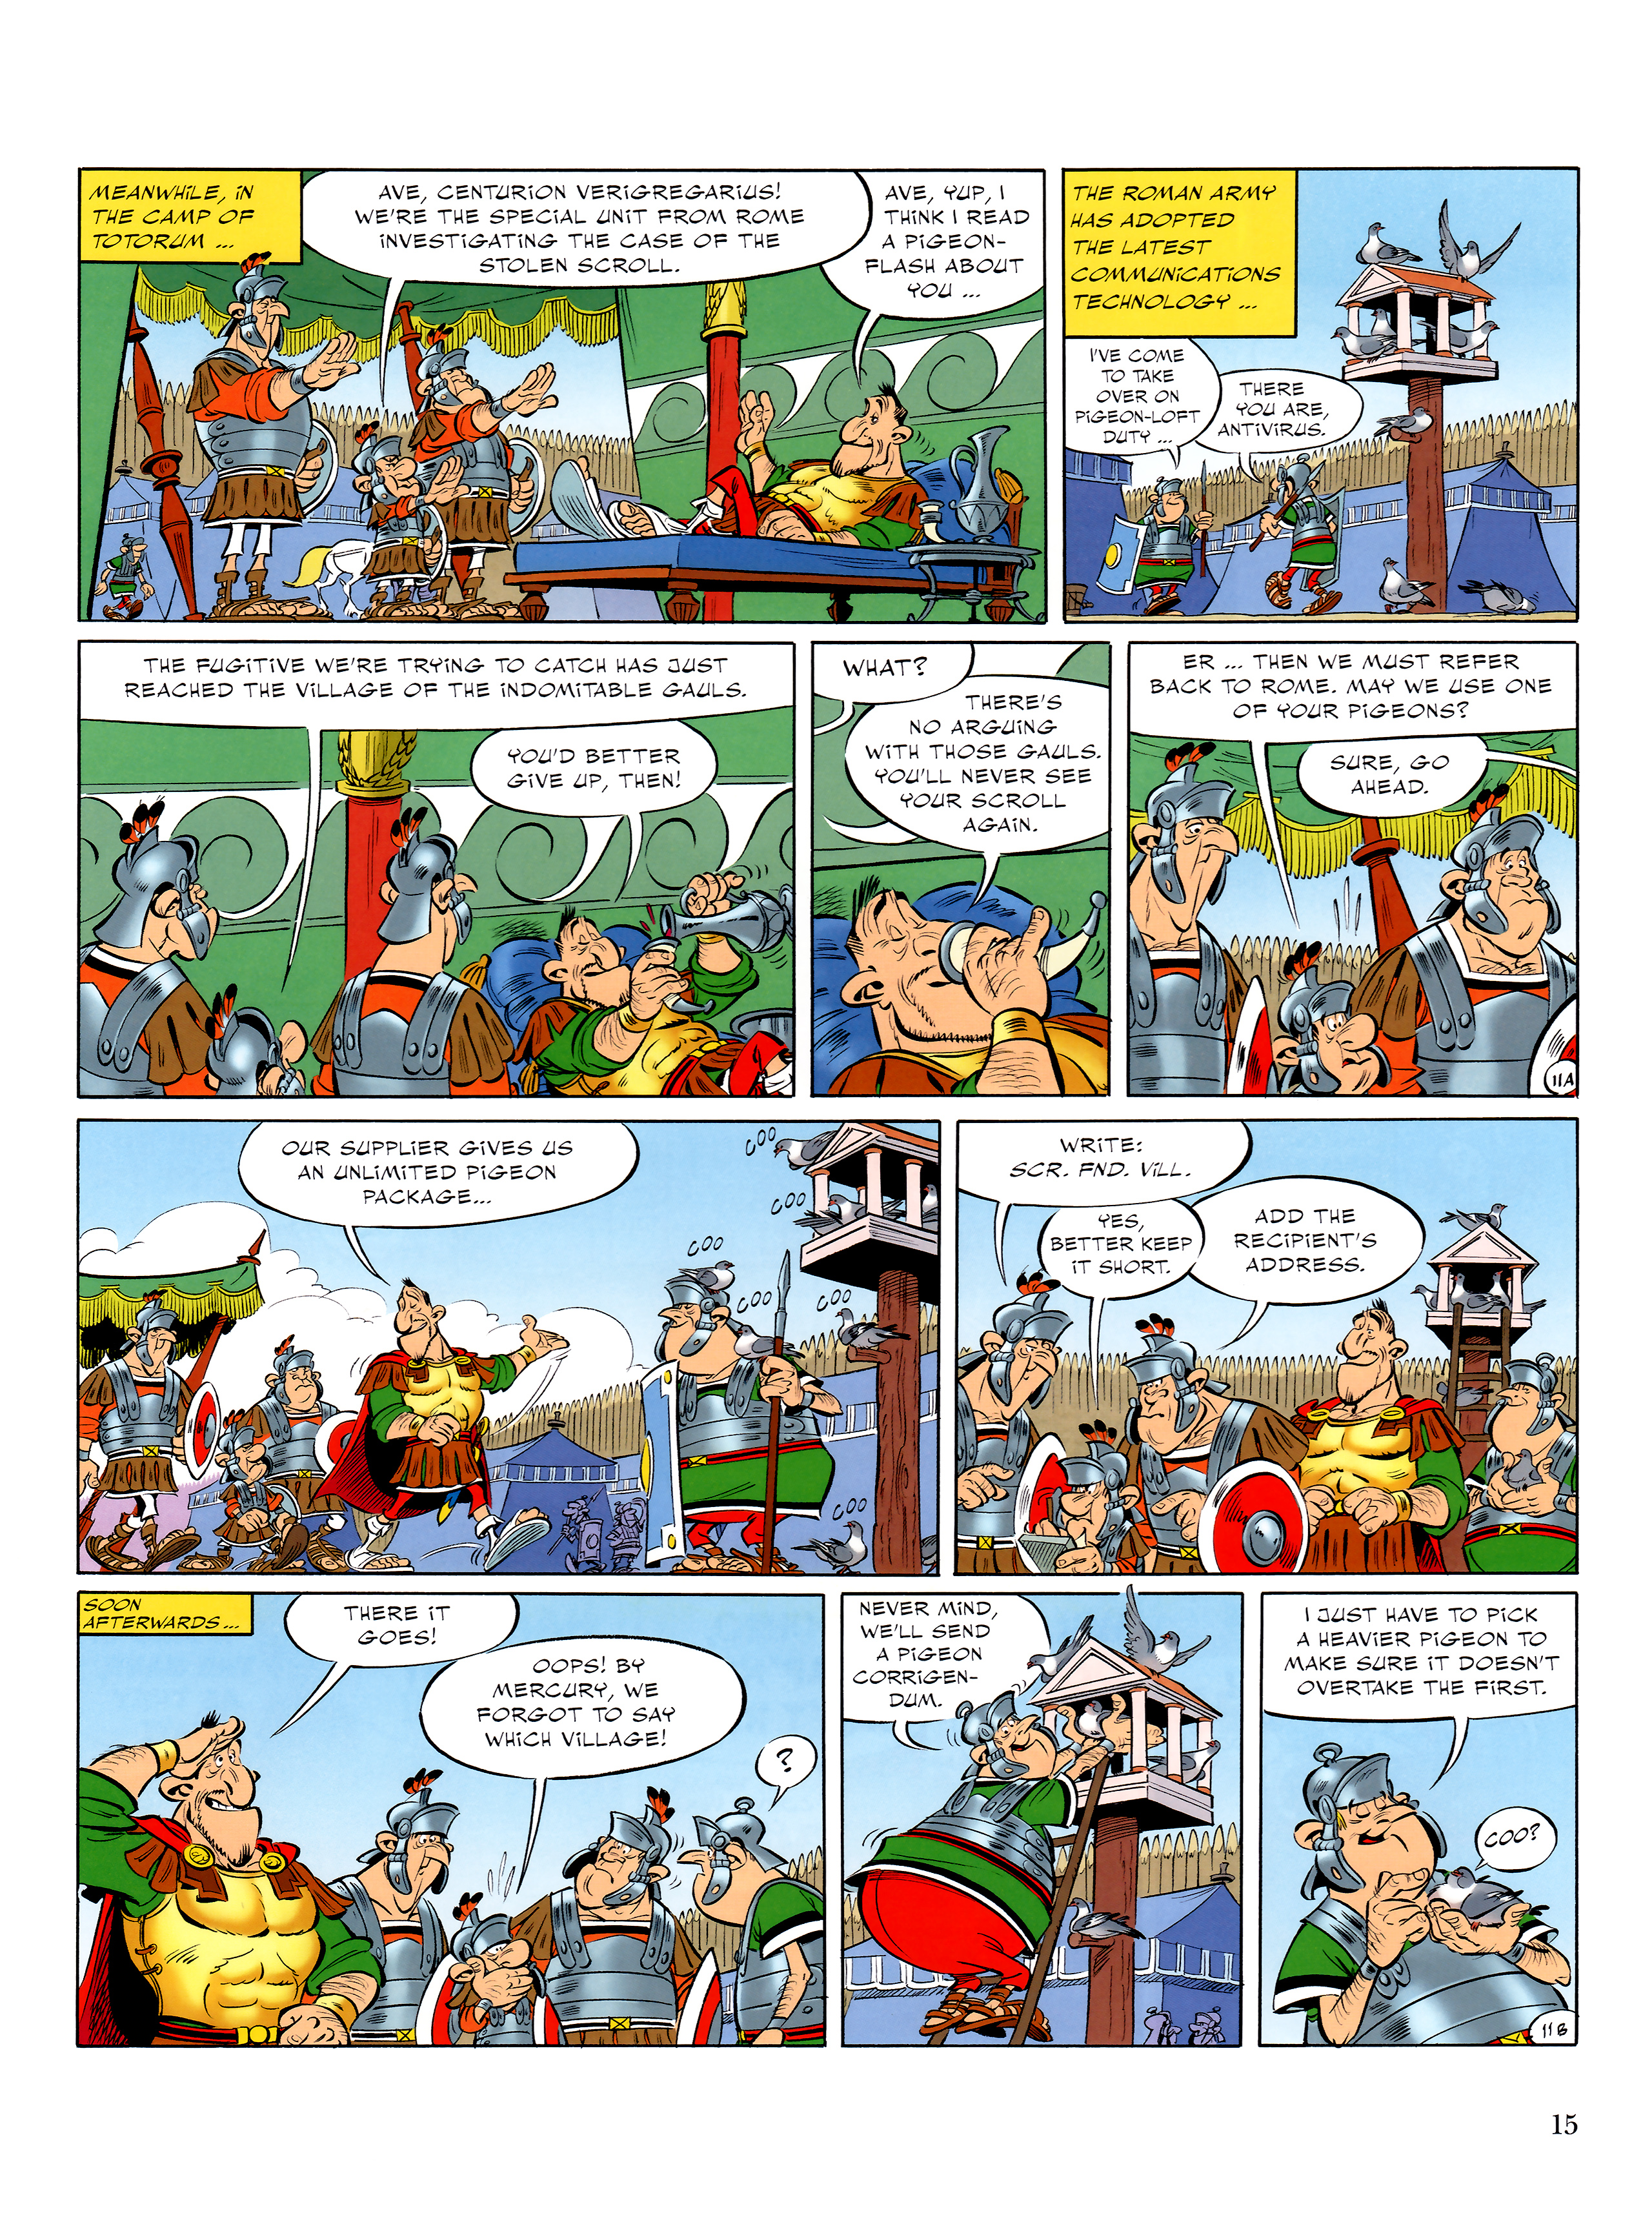 Read online Asterix comic -  Issue #36 - 16